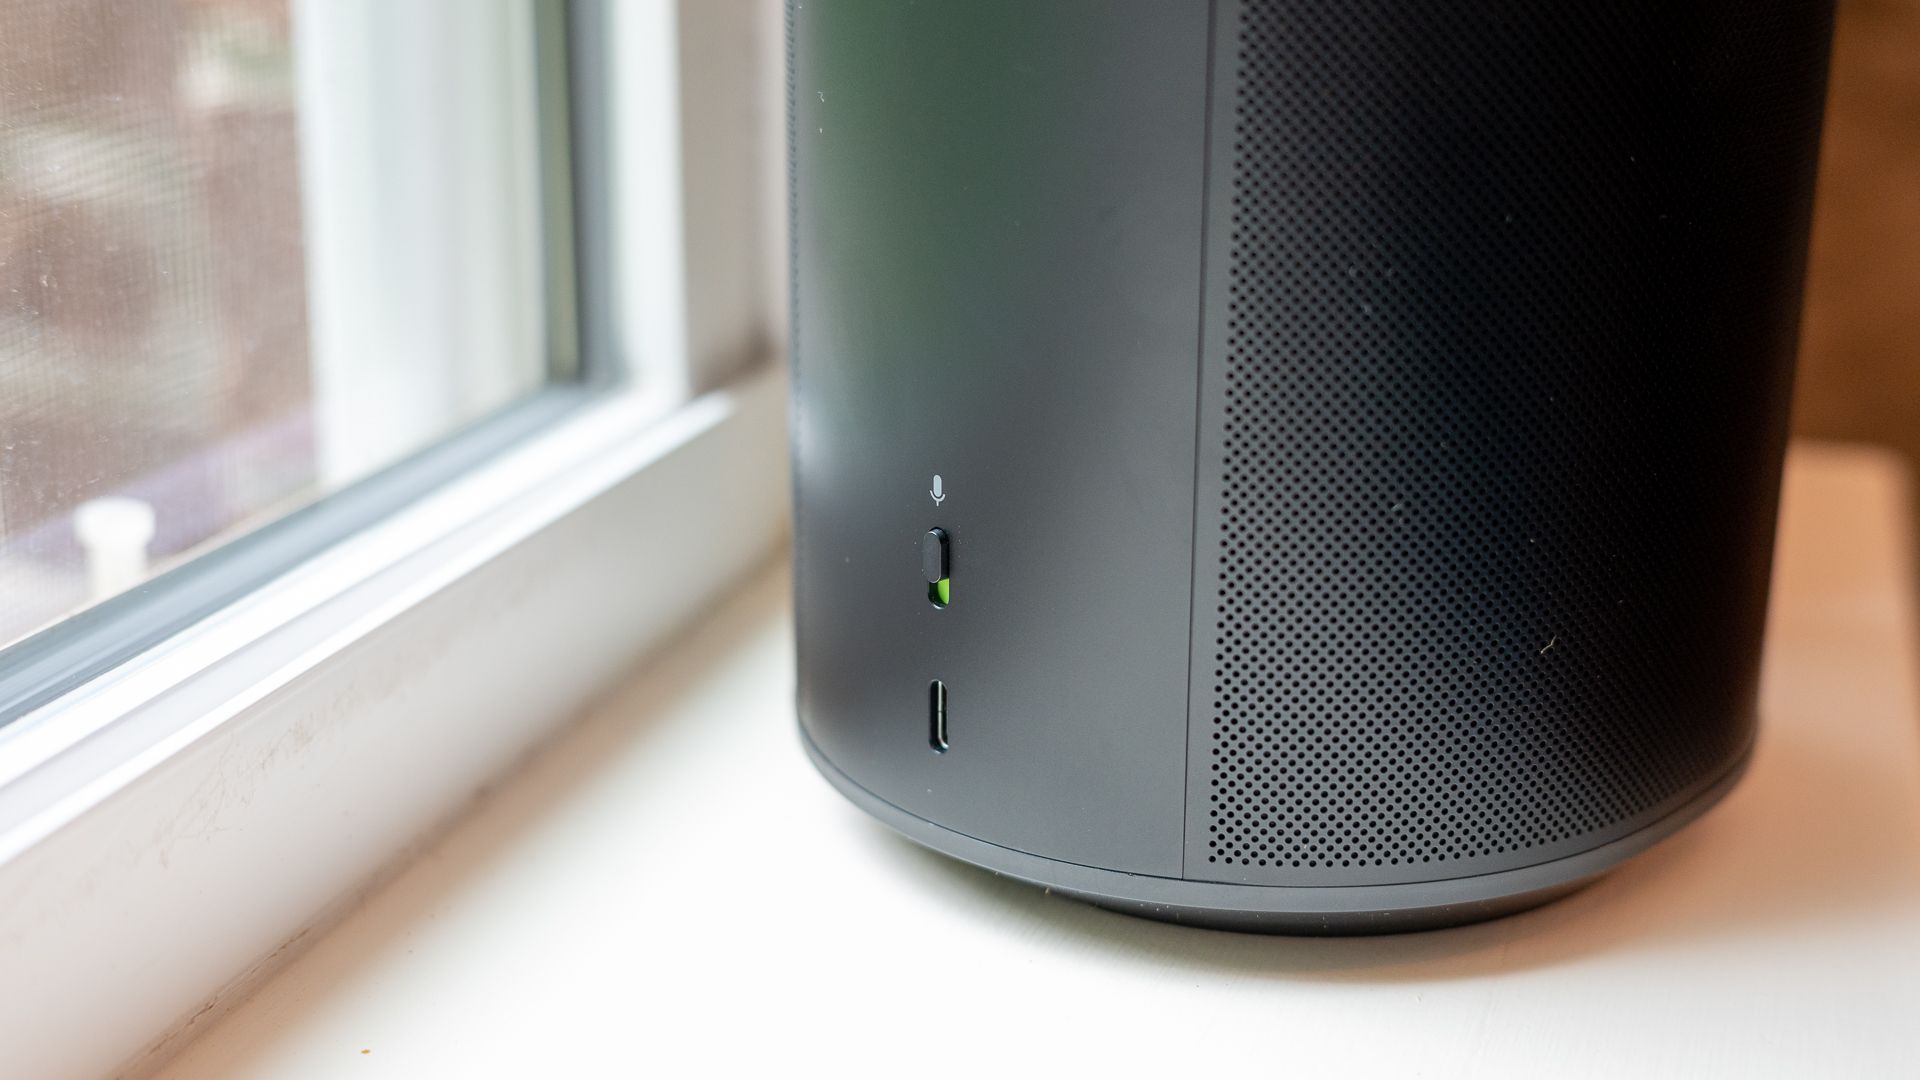 USB-C port and microphone mute switch on the back of the Sonos Era 100